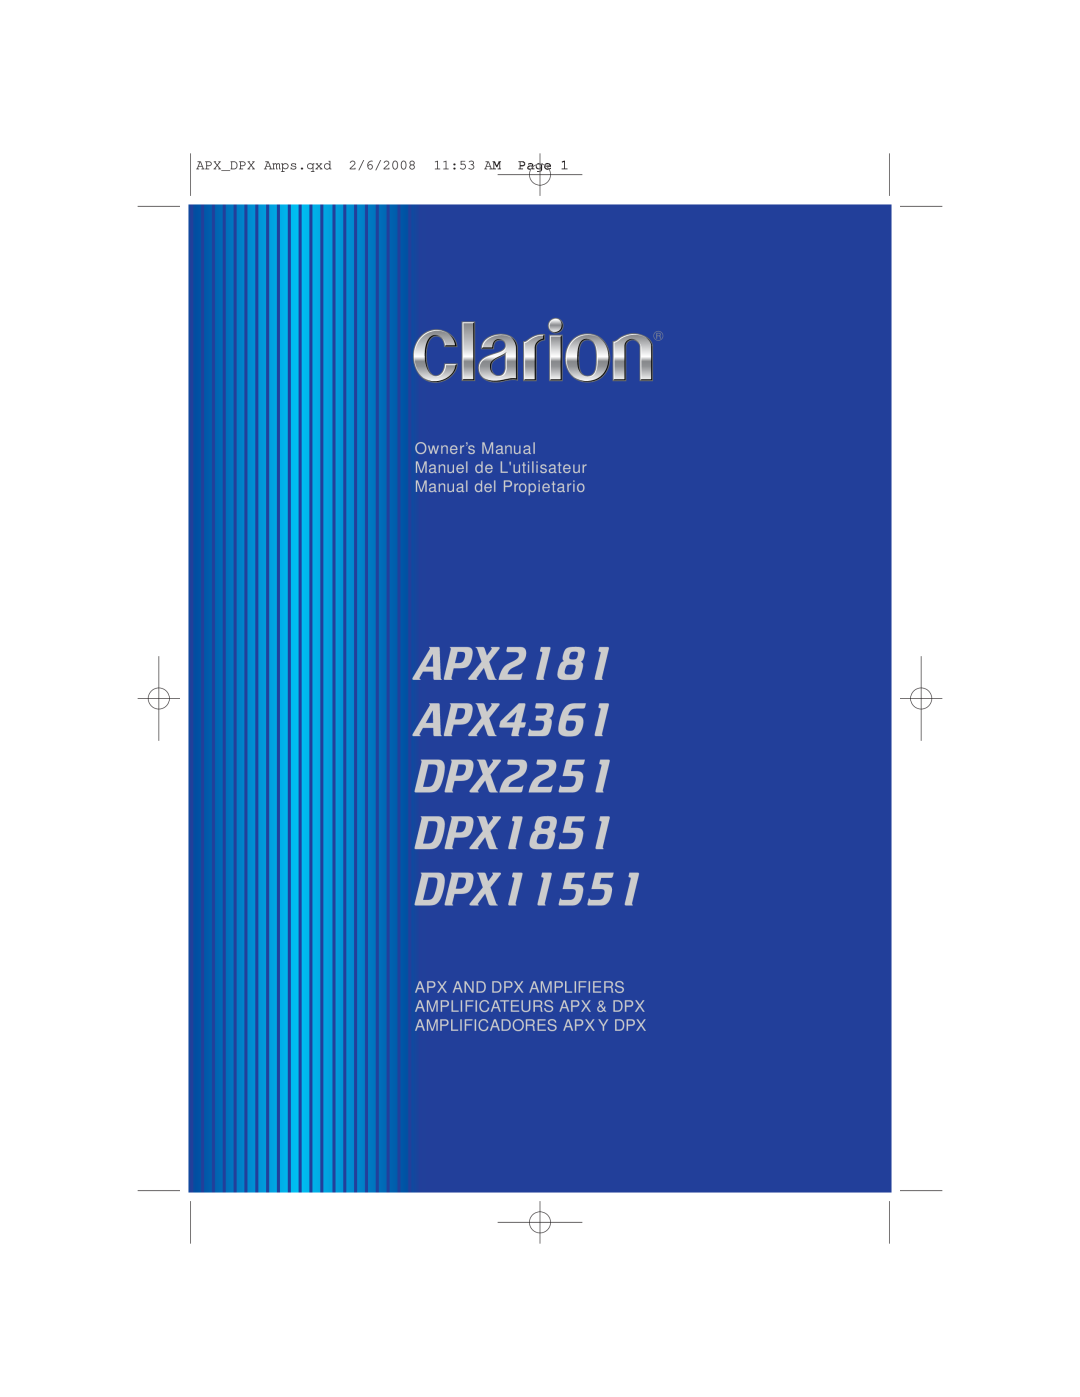 Clarion owner manual APX2181 APX4361 DPX2251 DPX1851 DPX11551, APXDPX Amps.qxd 2/6/2008 1153 AM Page 